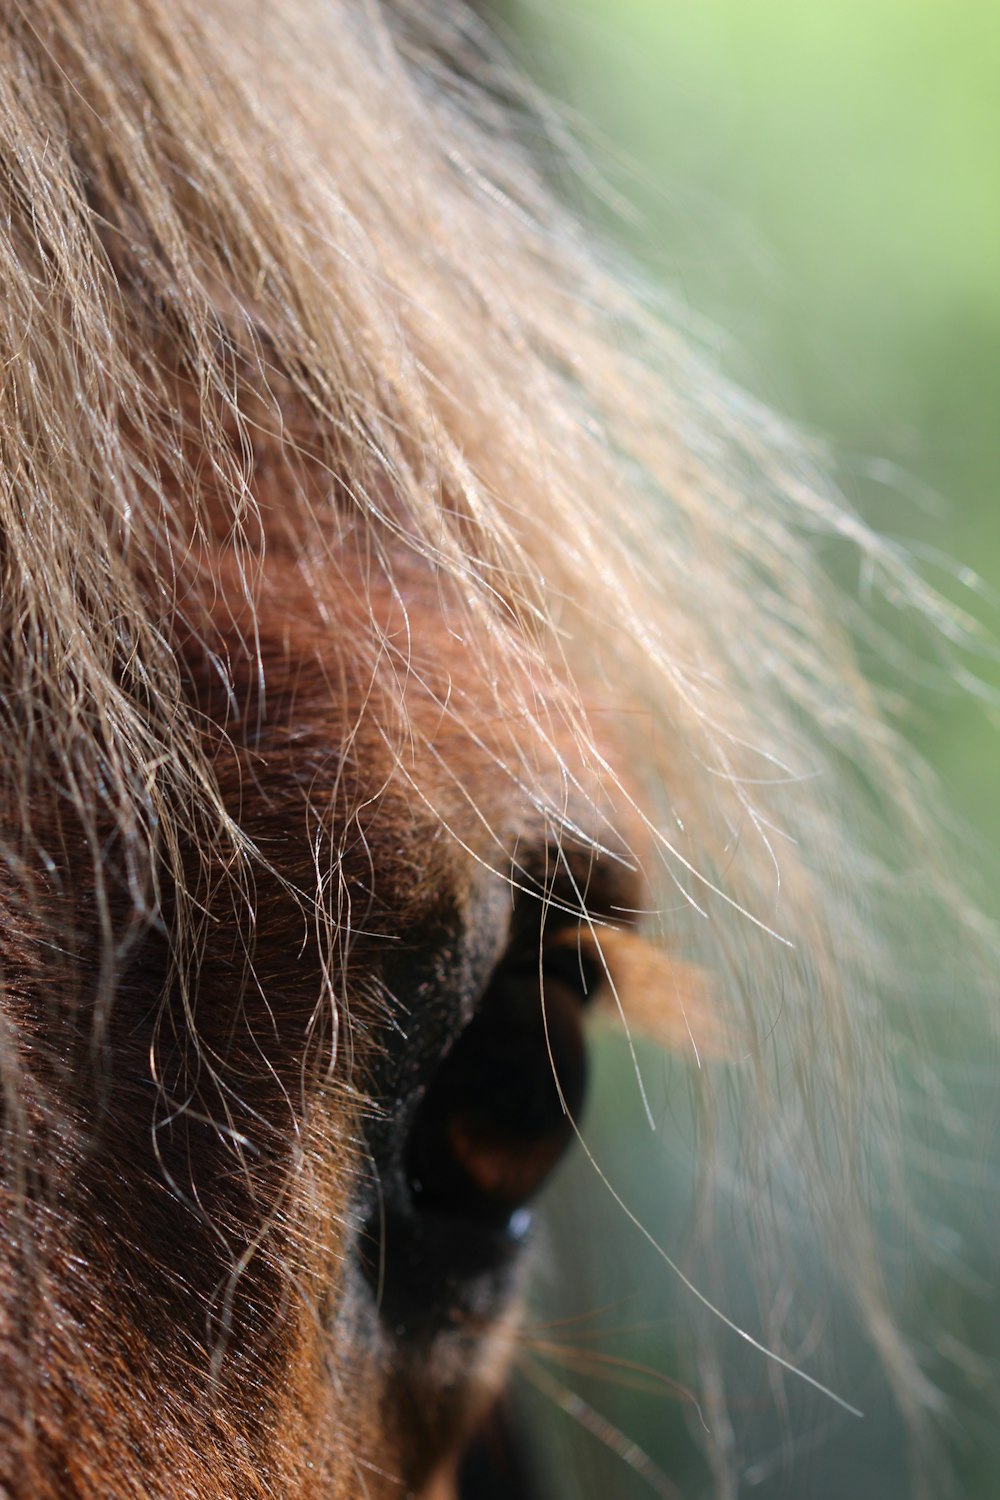 brown horse eye in close up photography